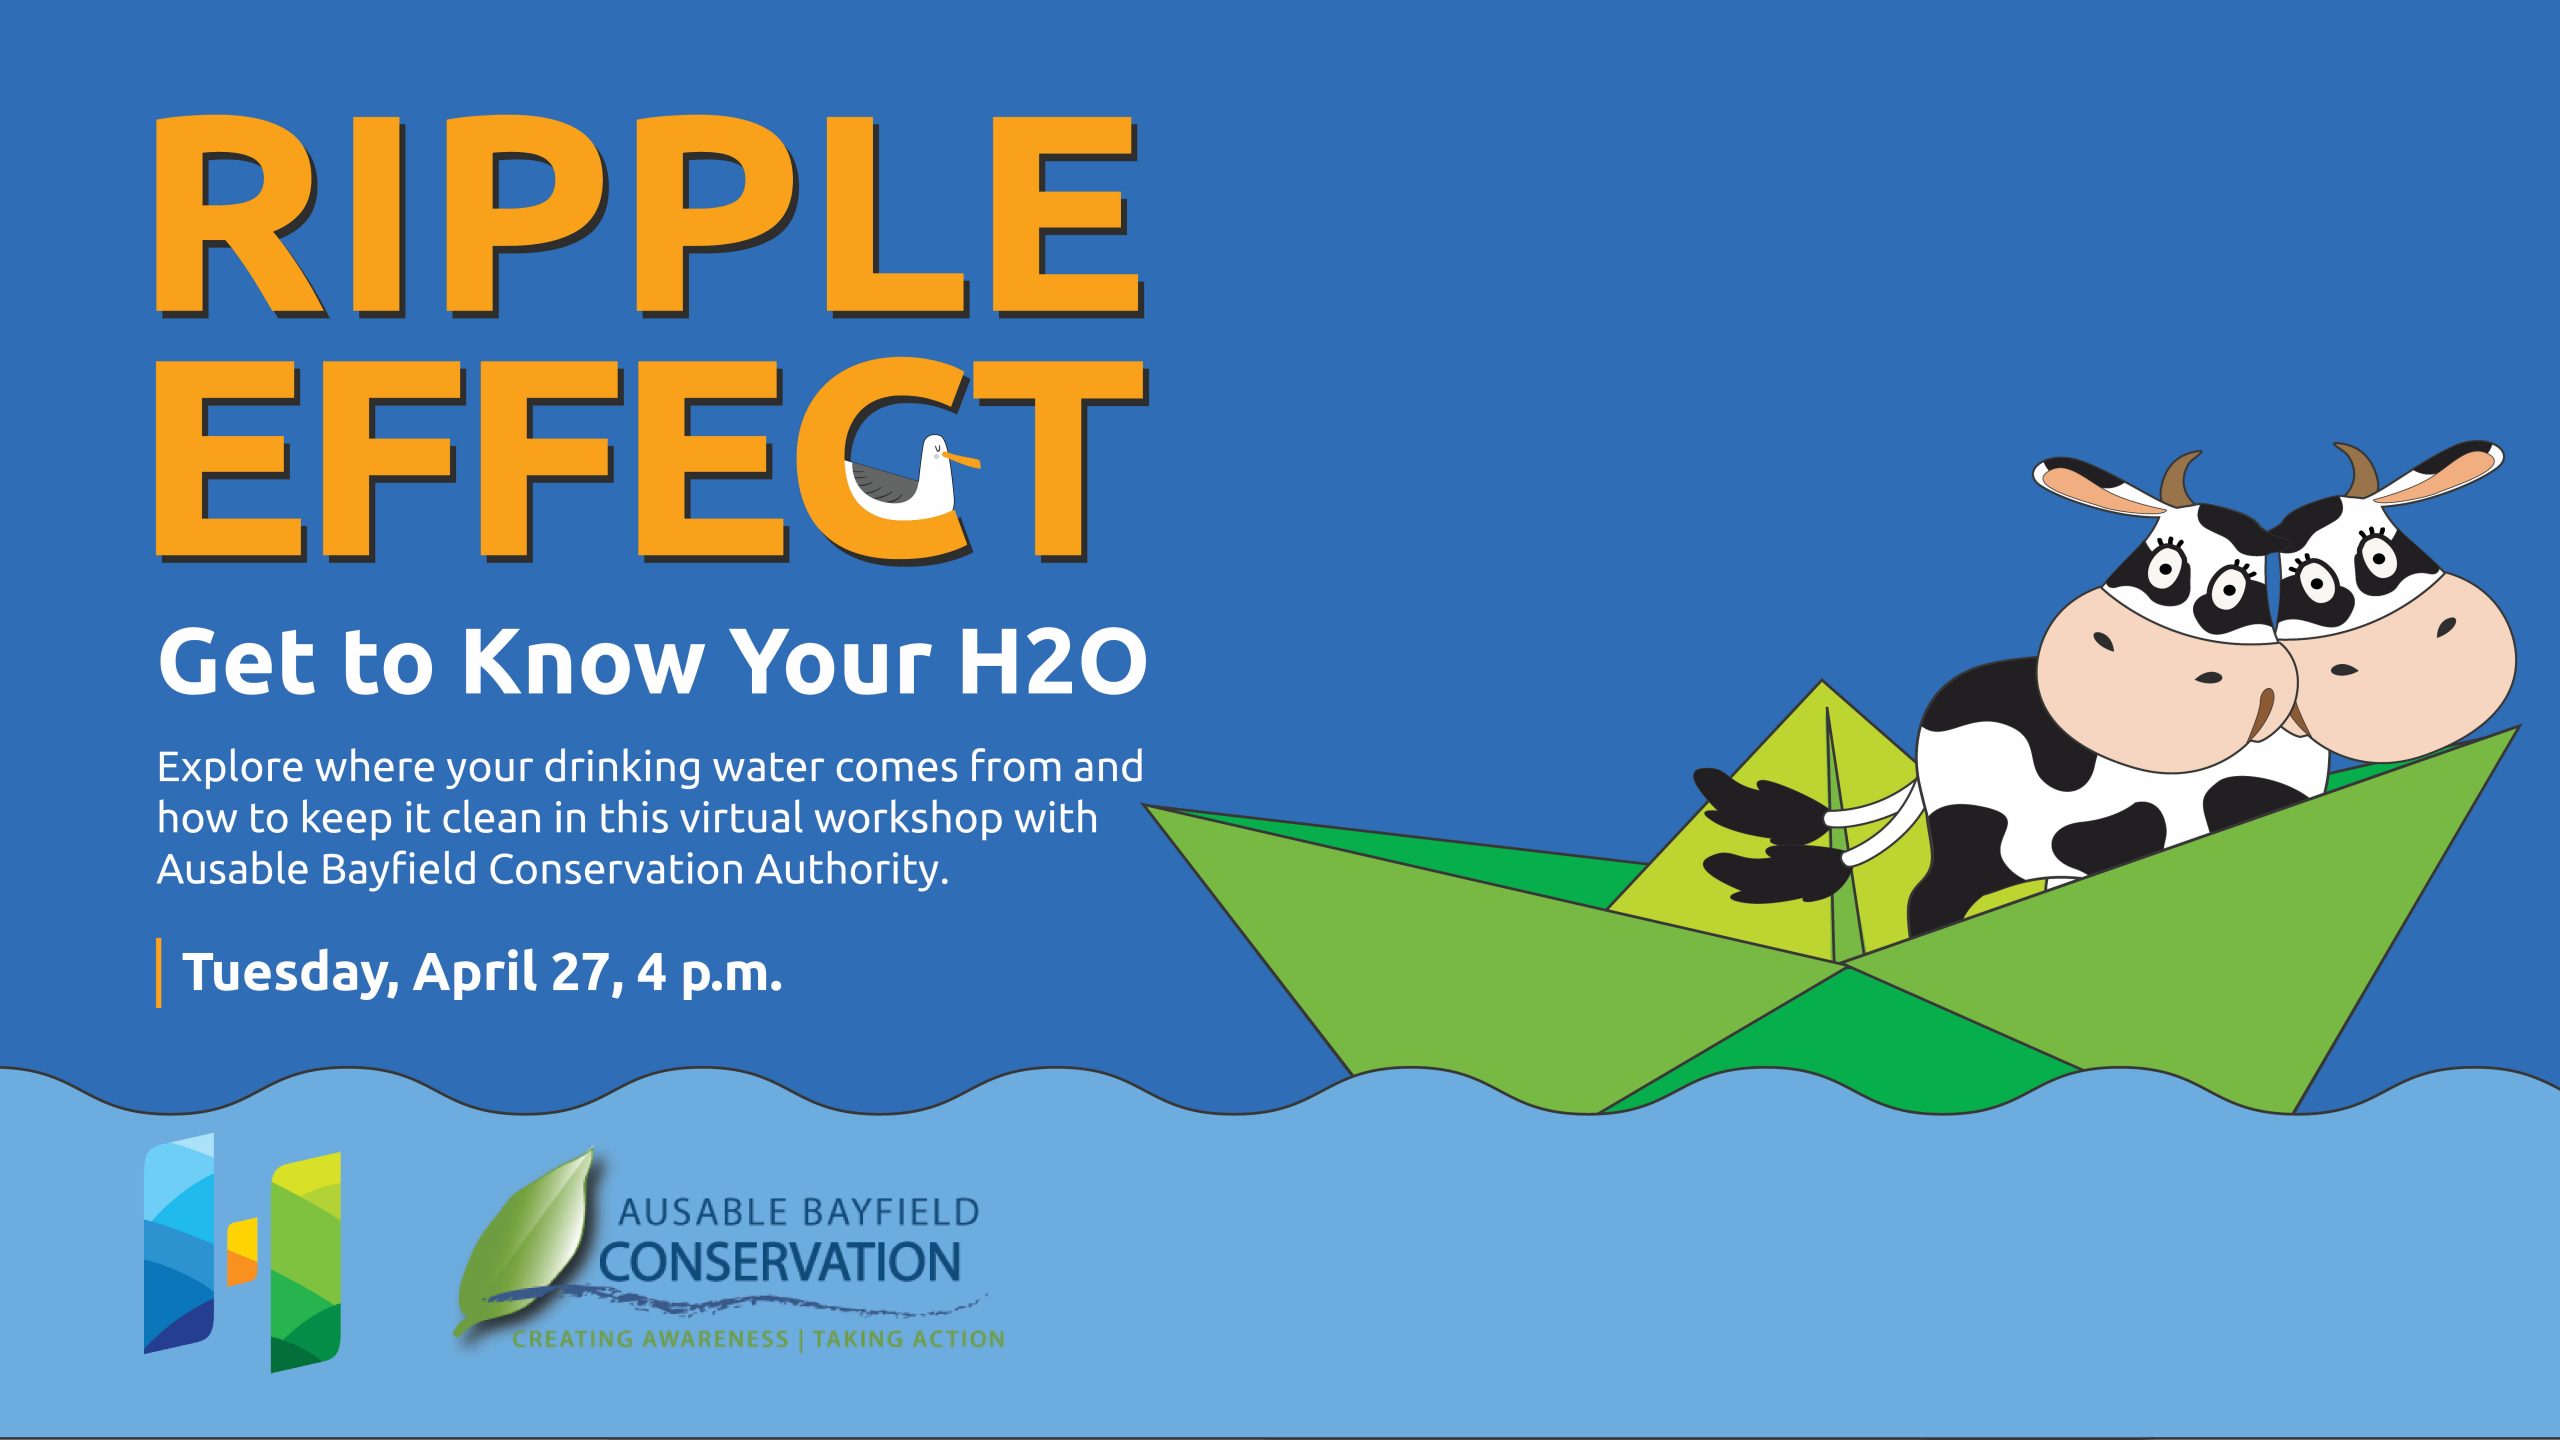 Ripple Effect: Get to know your H20 virtual event